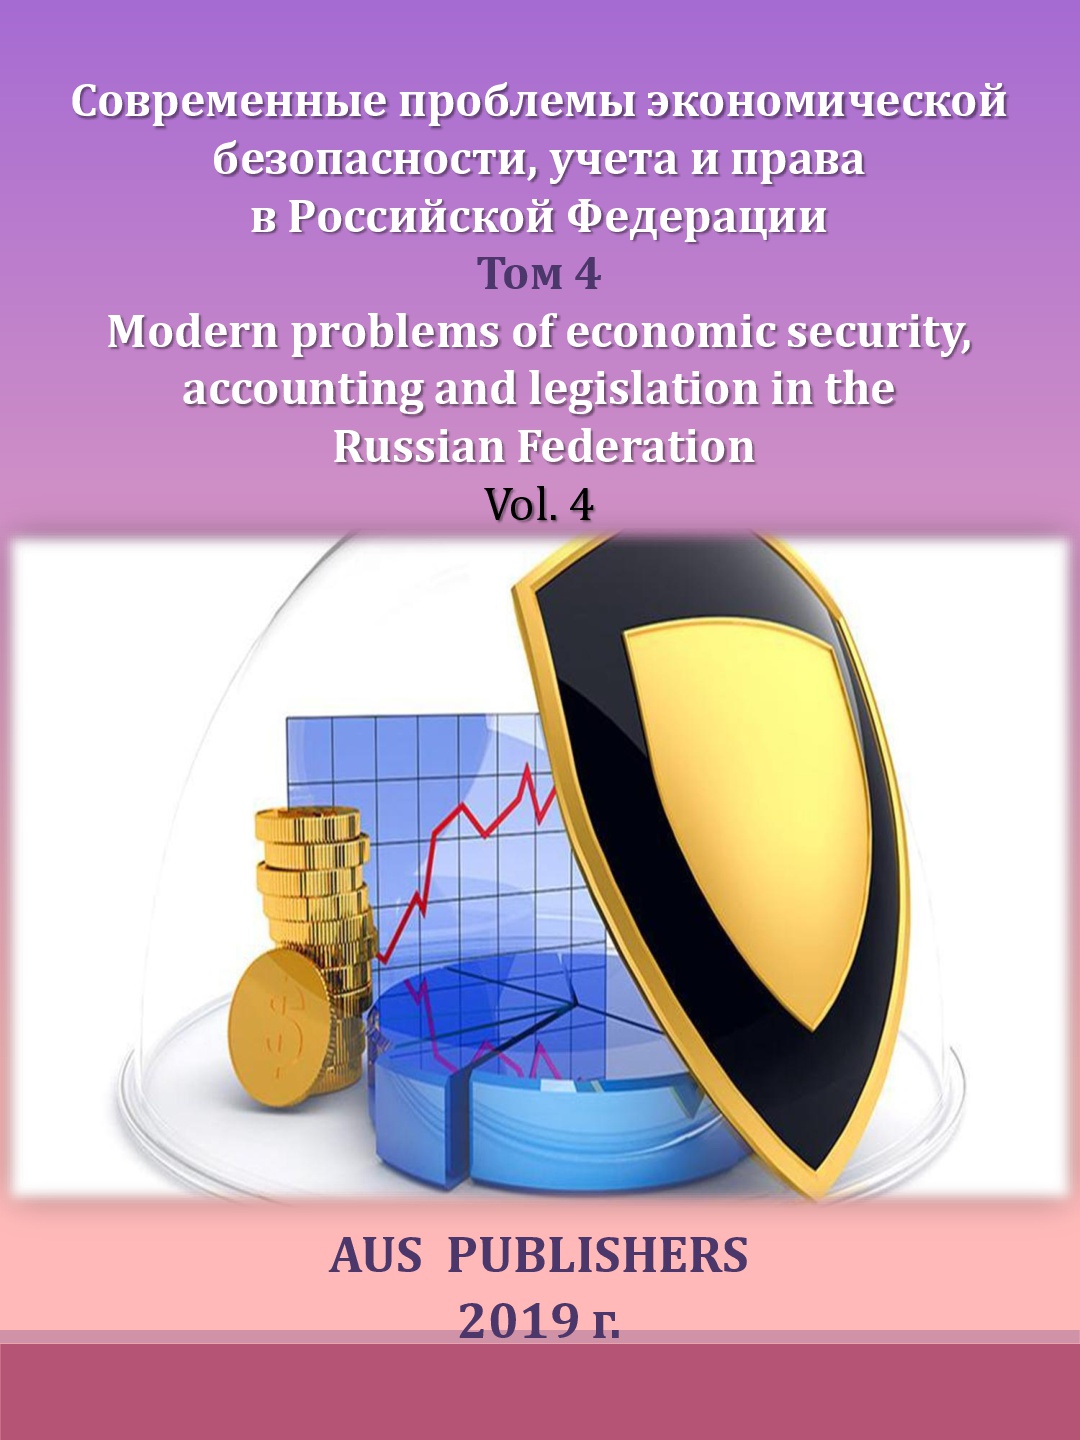                         Modern problems of an economic safety, accounting and the right in the Russian Federation. Vol.4
            